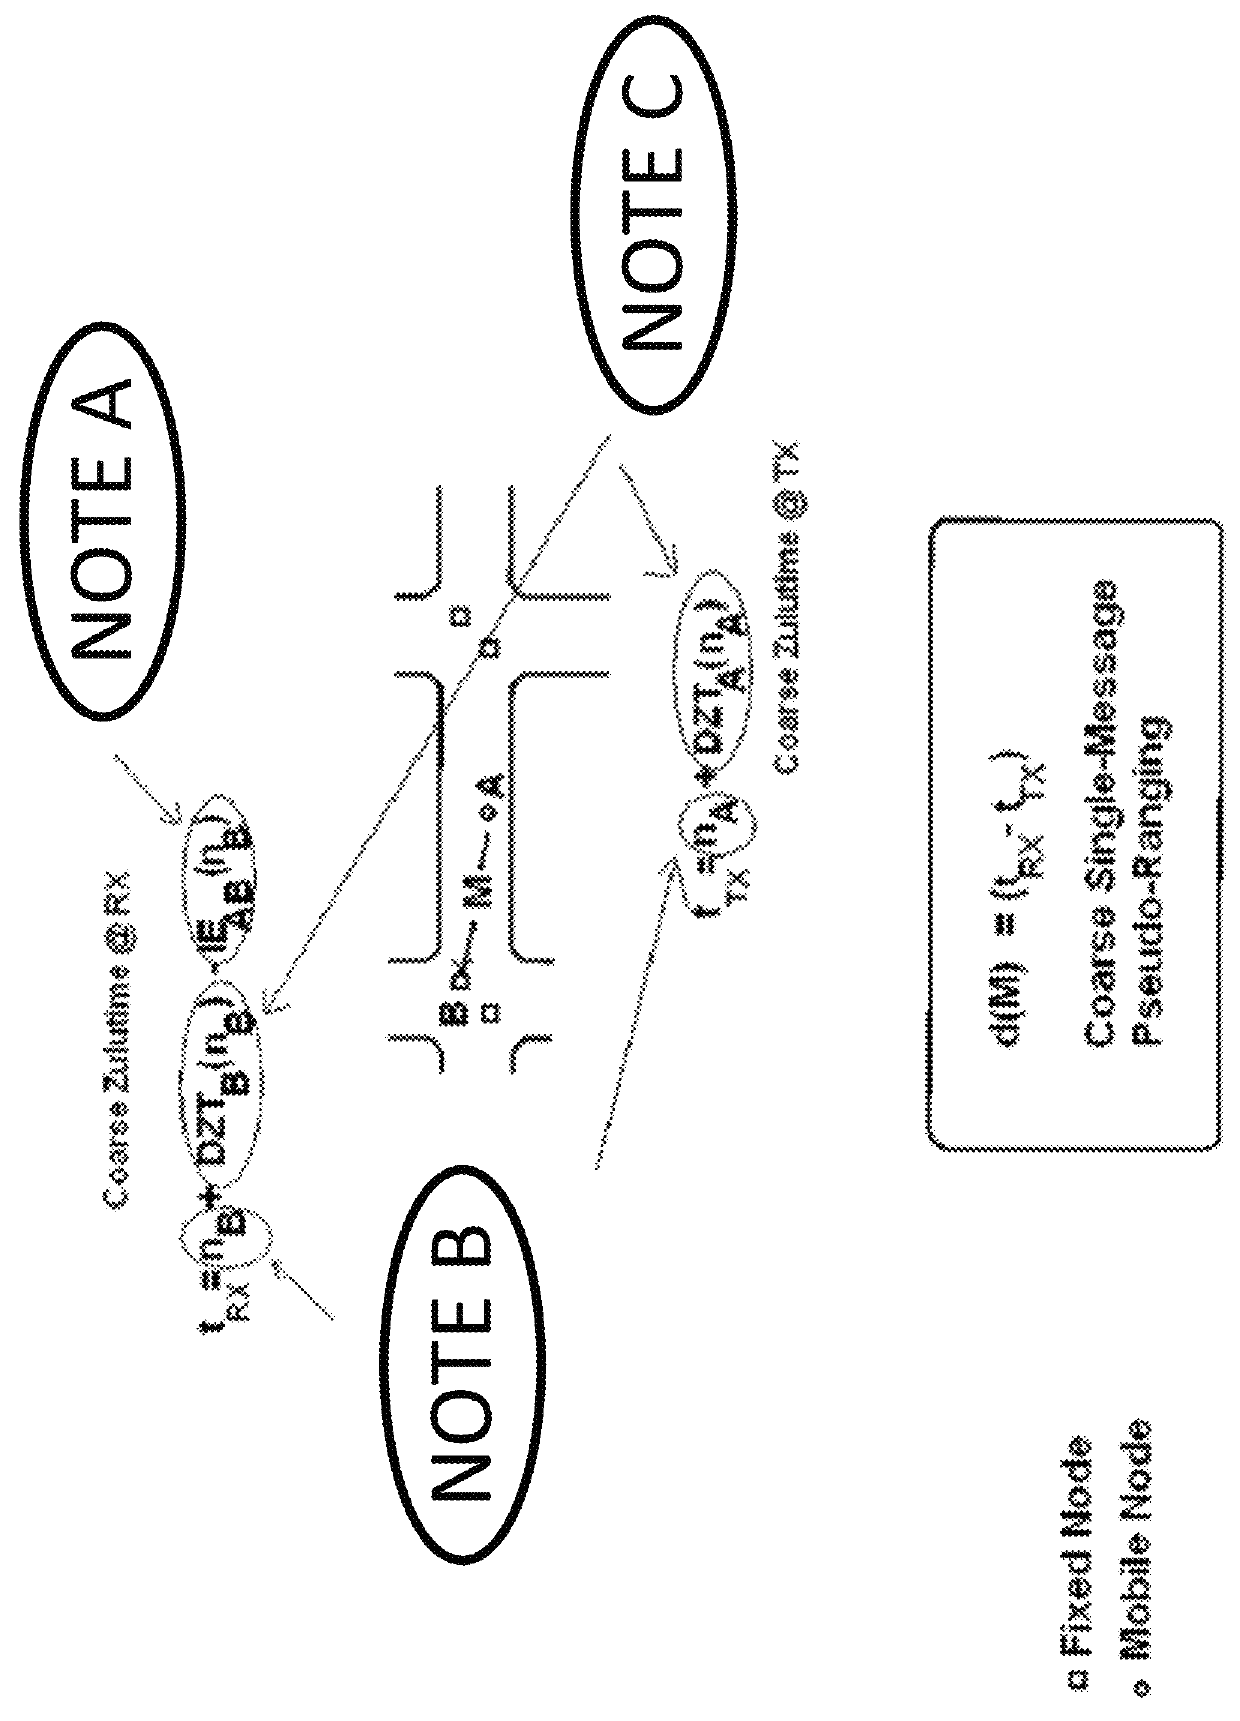 A/B/C phase determination and synchrophasor measurement using common electric smart meters and wireless communications